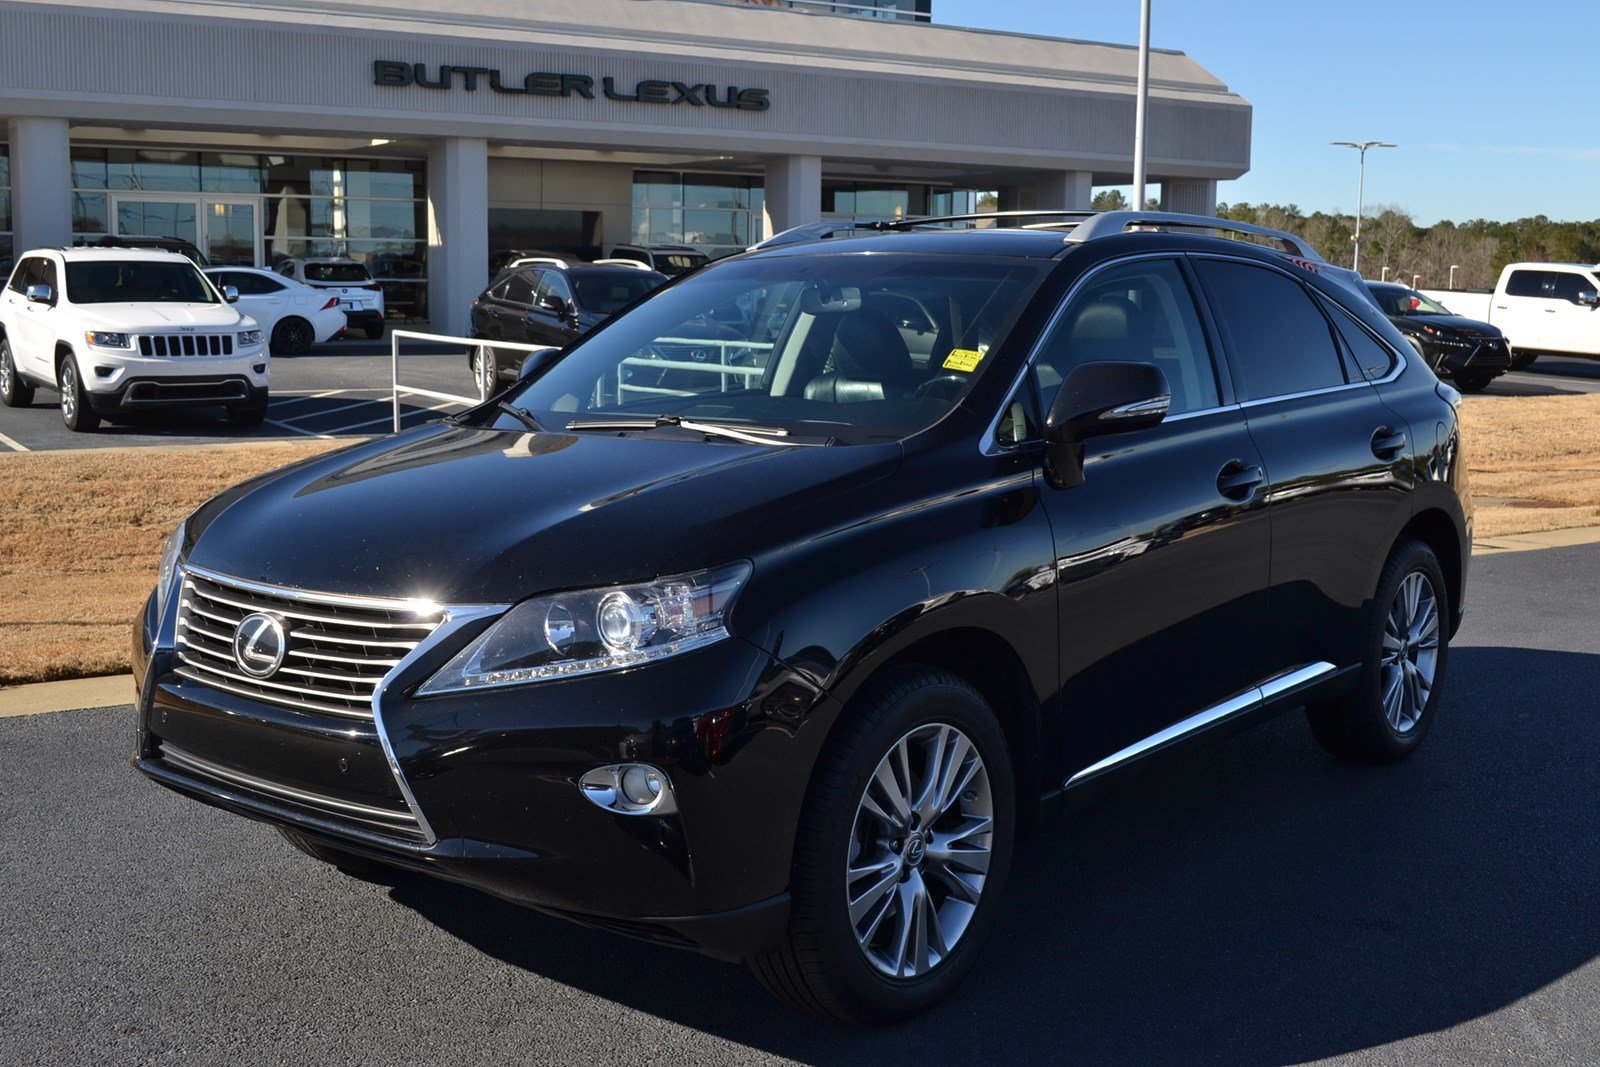 PreOwned 2013 Lexus RX 350 Sport Utility in Macon 